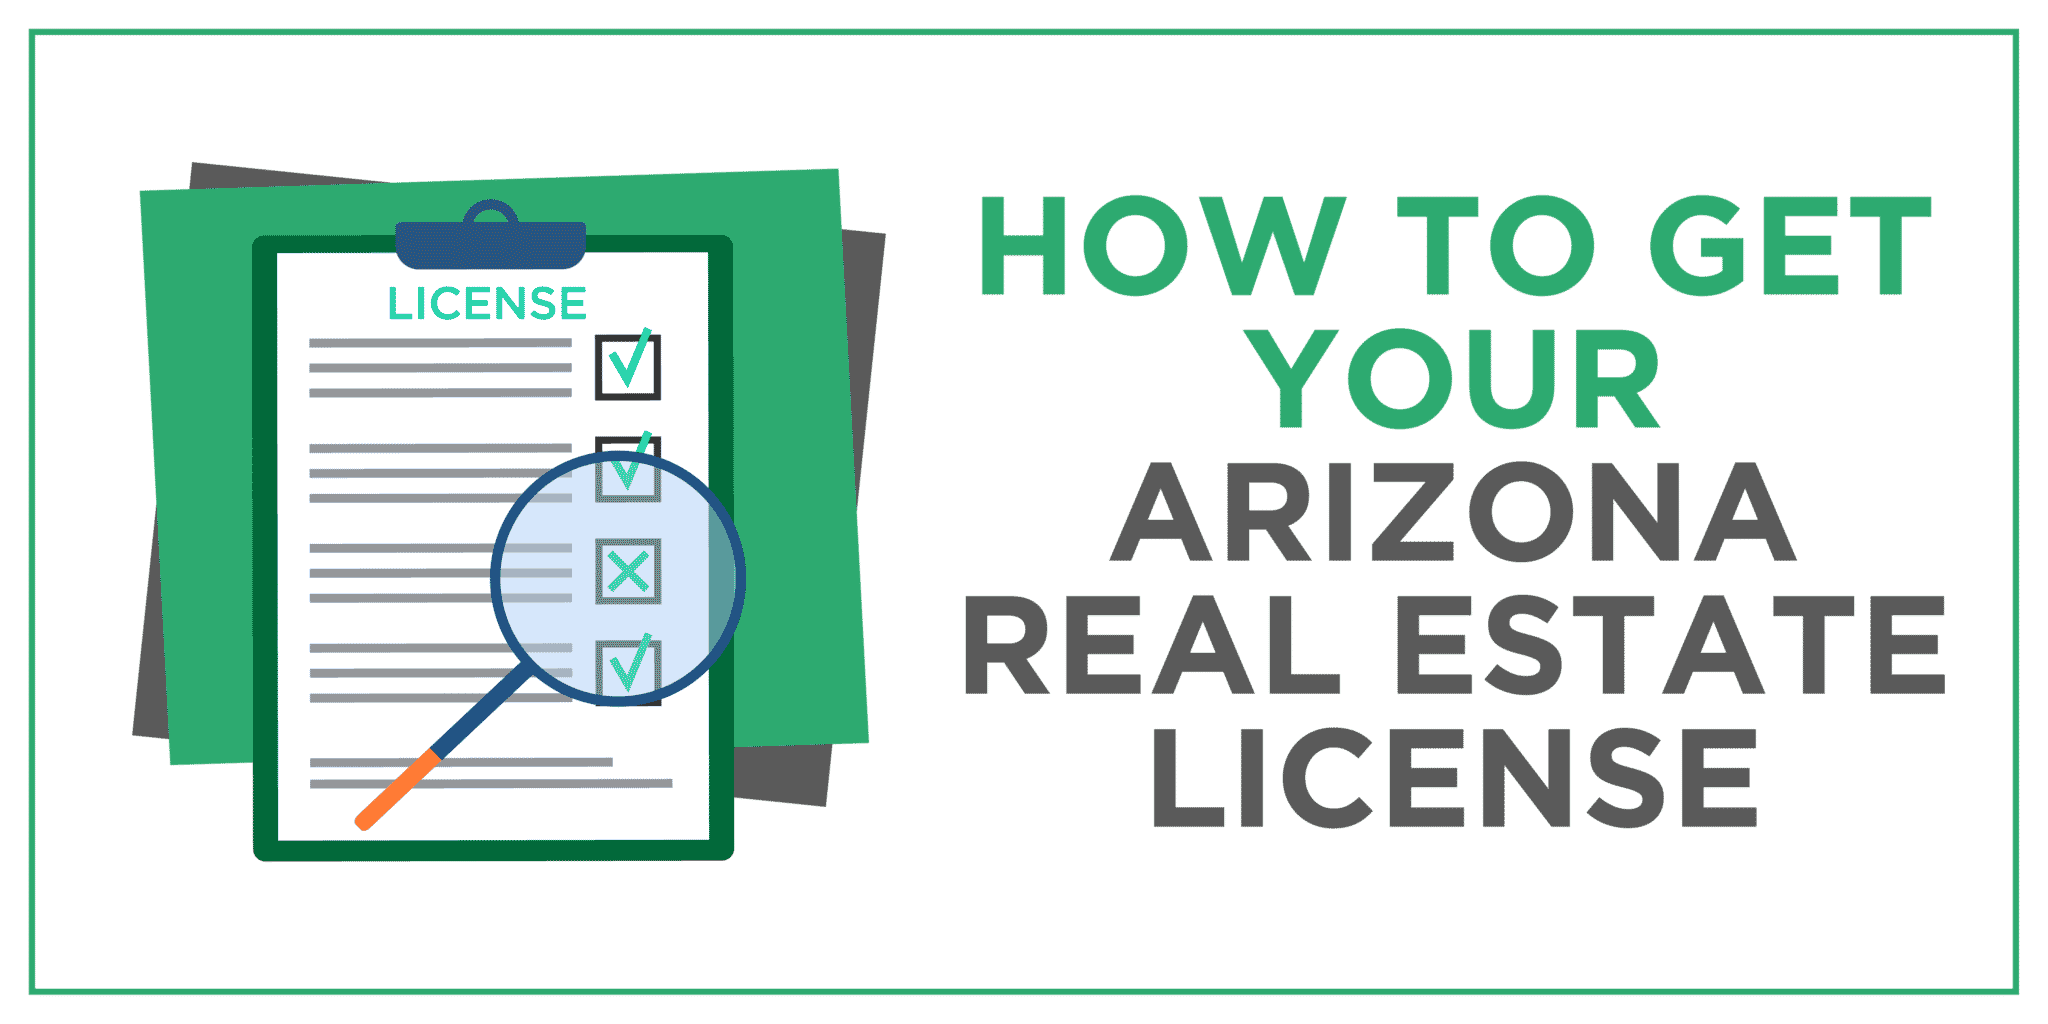 How to Get Your Arizona Real Estate License